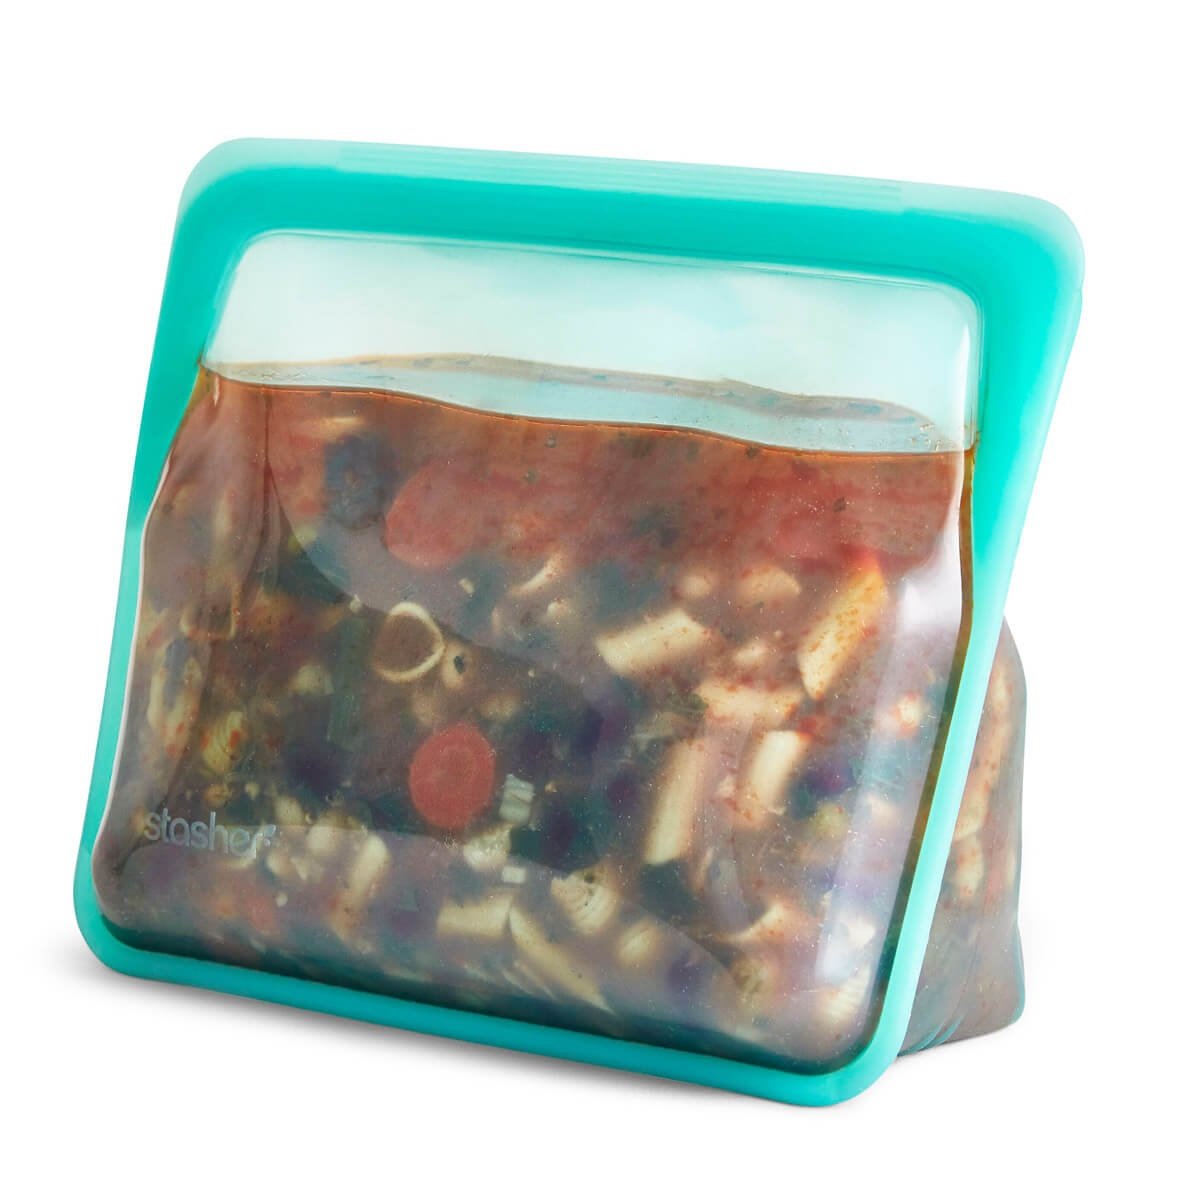 Stasher Bags Are The Best Reusable Silicone Bags for Food Storage in 2020   Epicurious